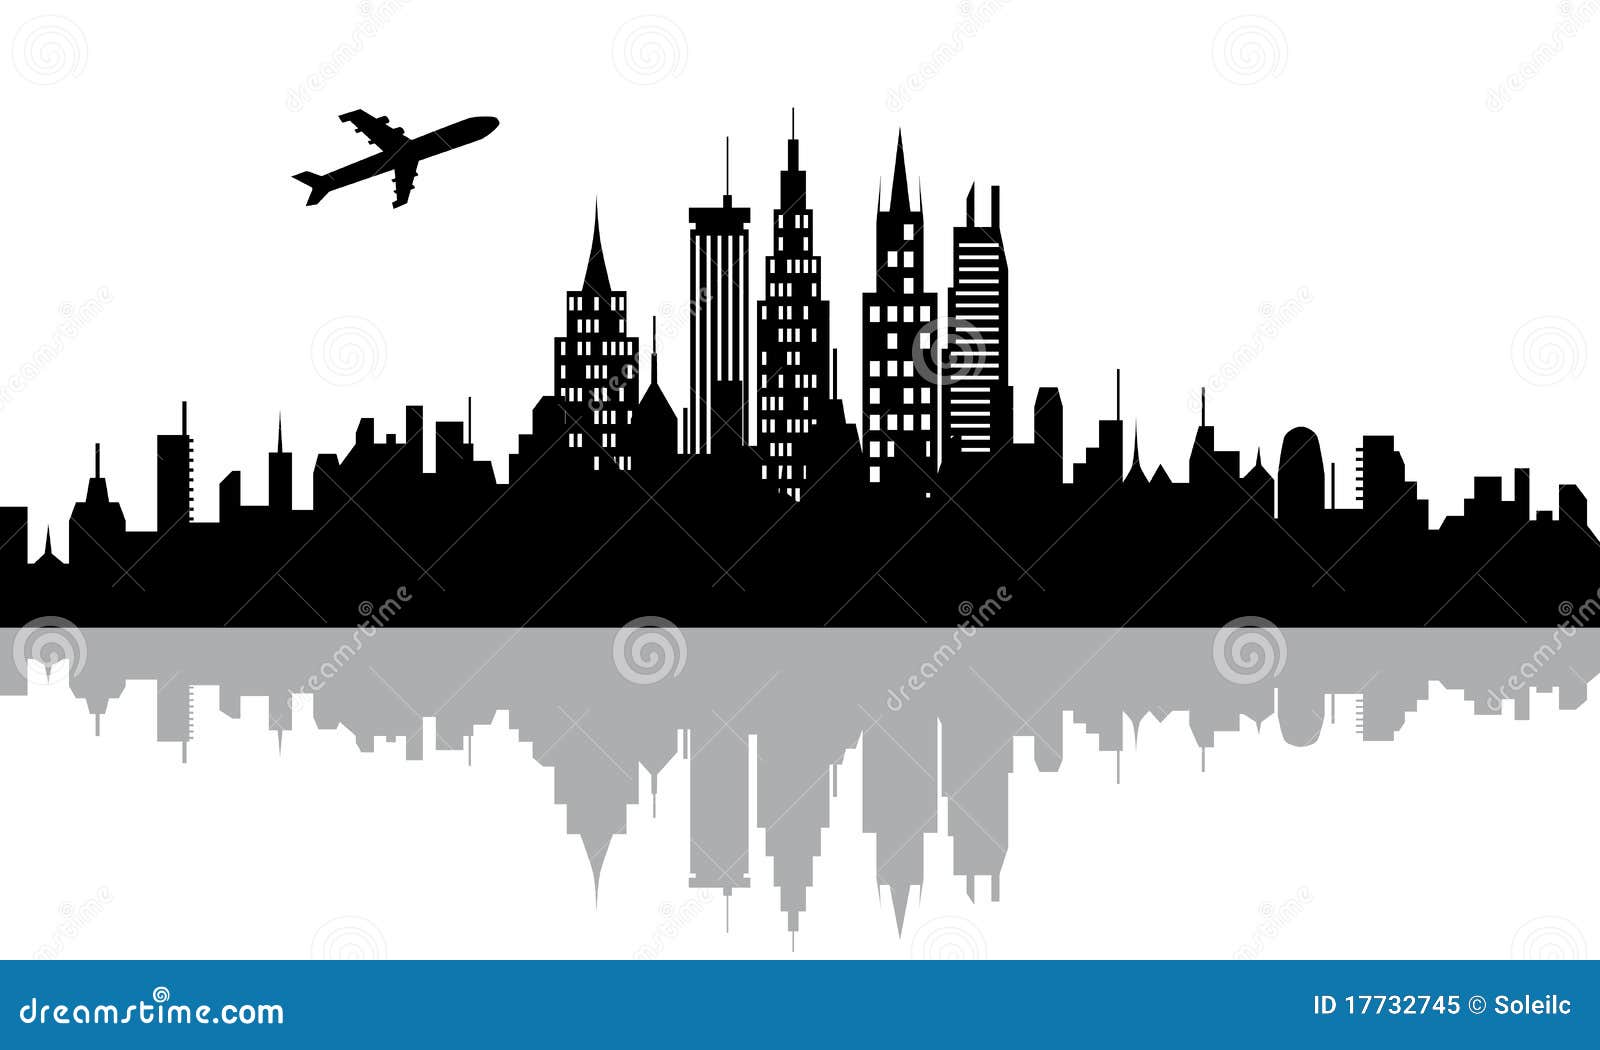 Cityscape with skyscrapers stock vector. Illustration of cartoon - 17732745